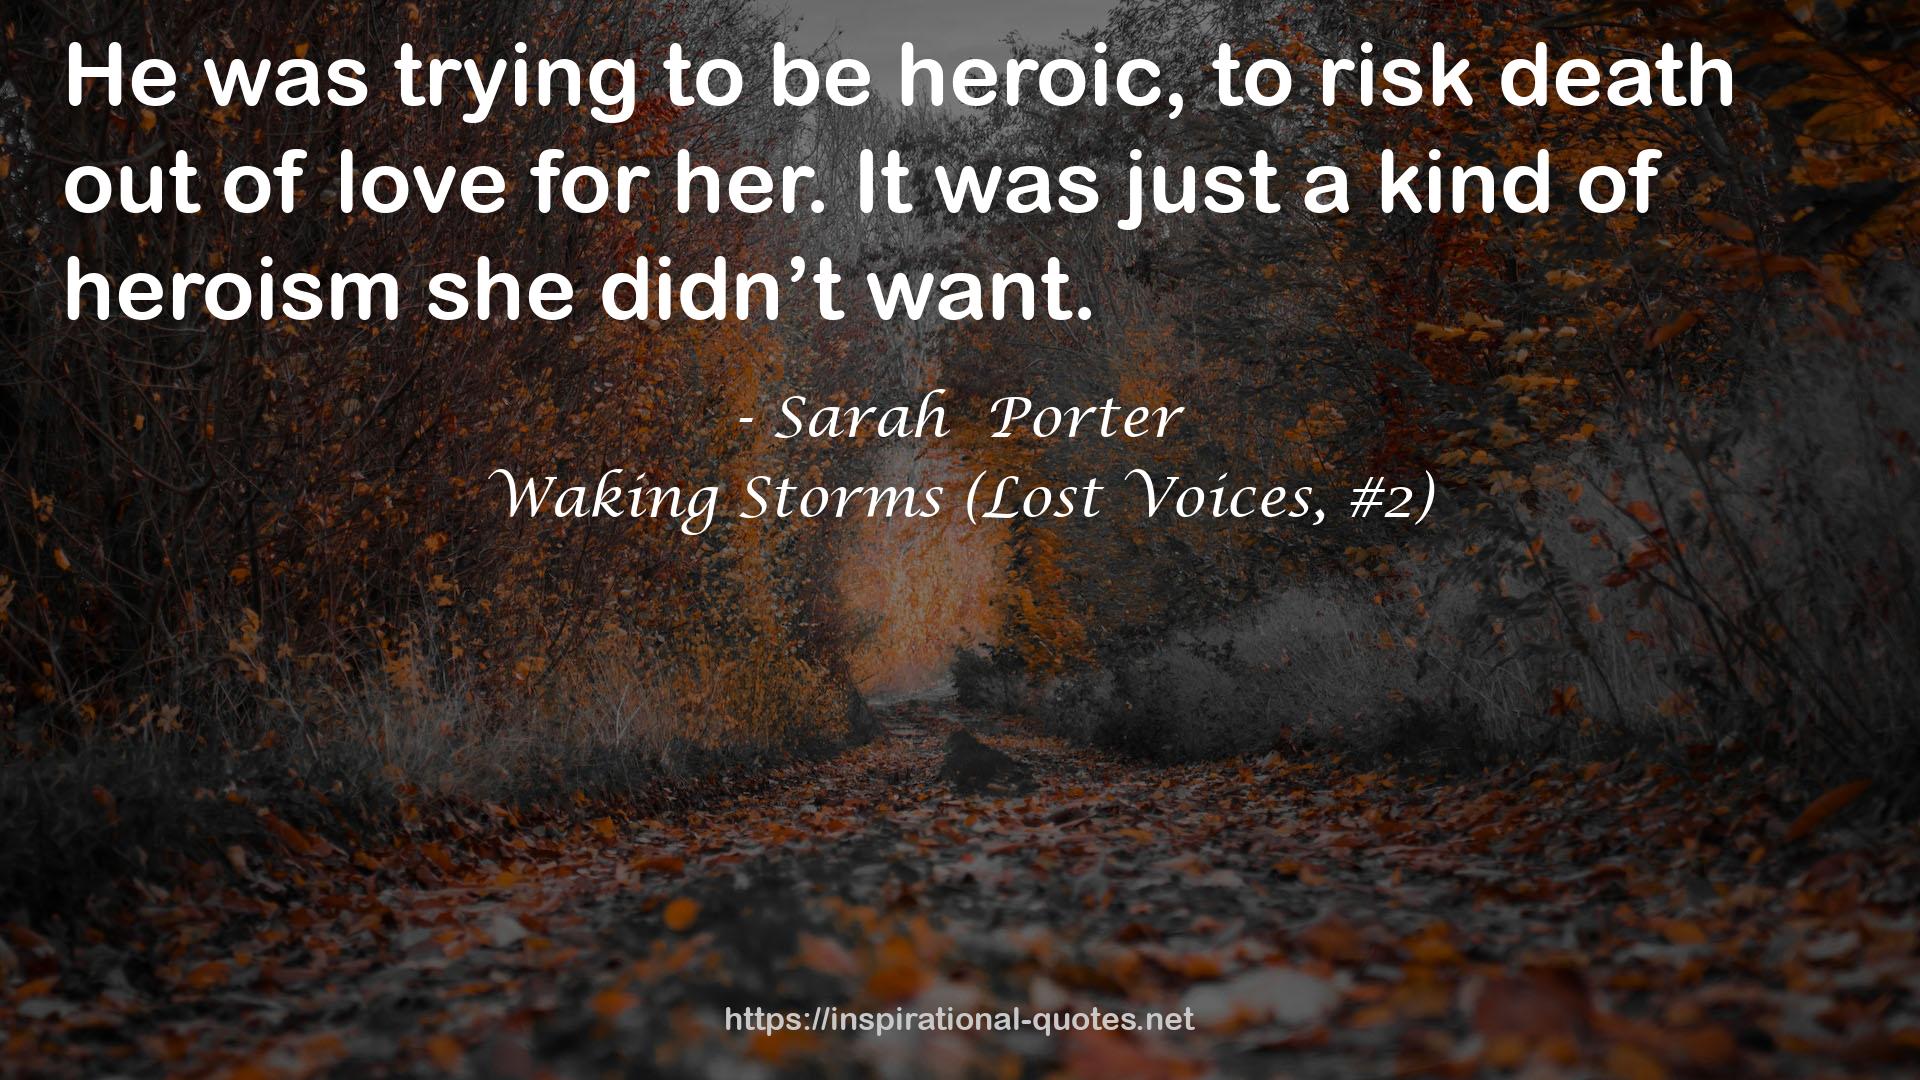 Waking Storms (Lost Voices, #2) QUOTES